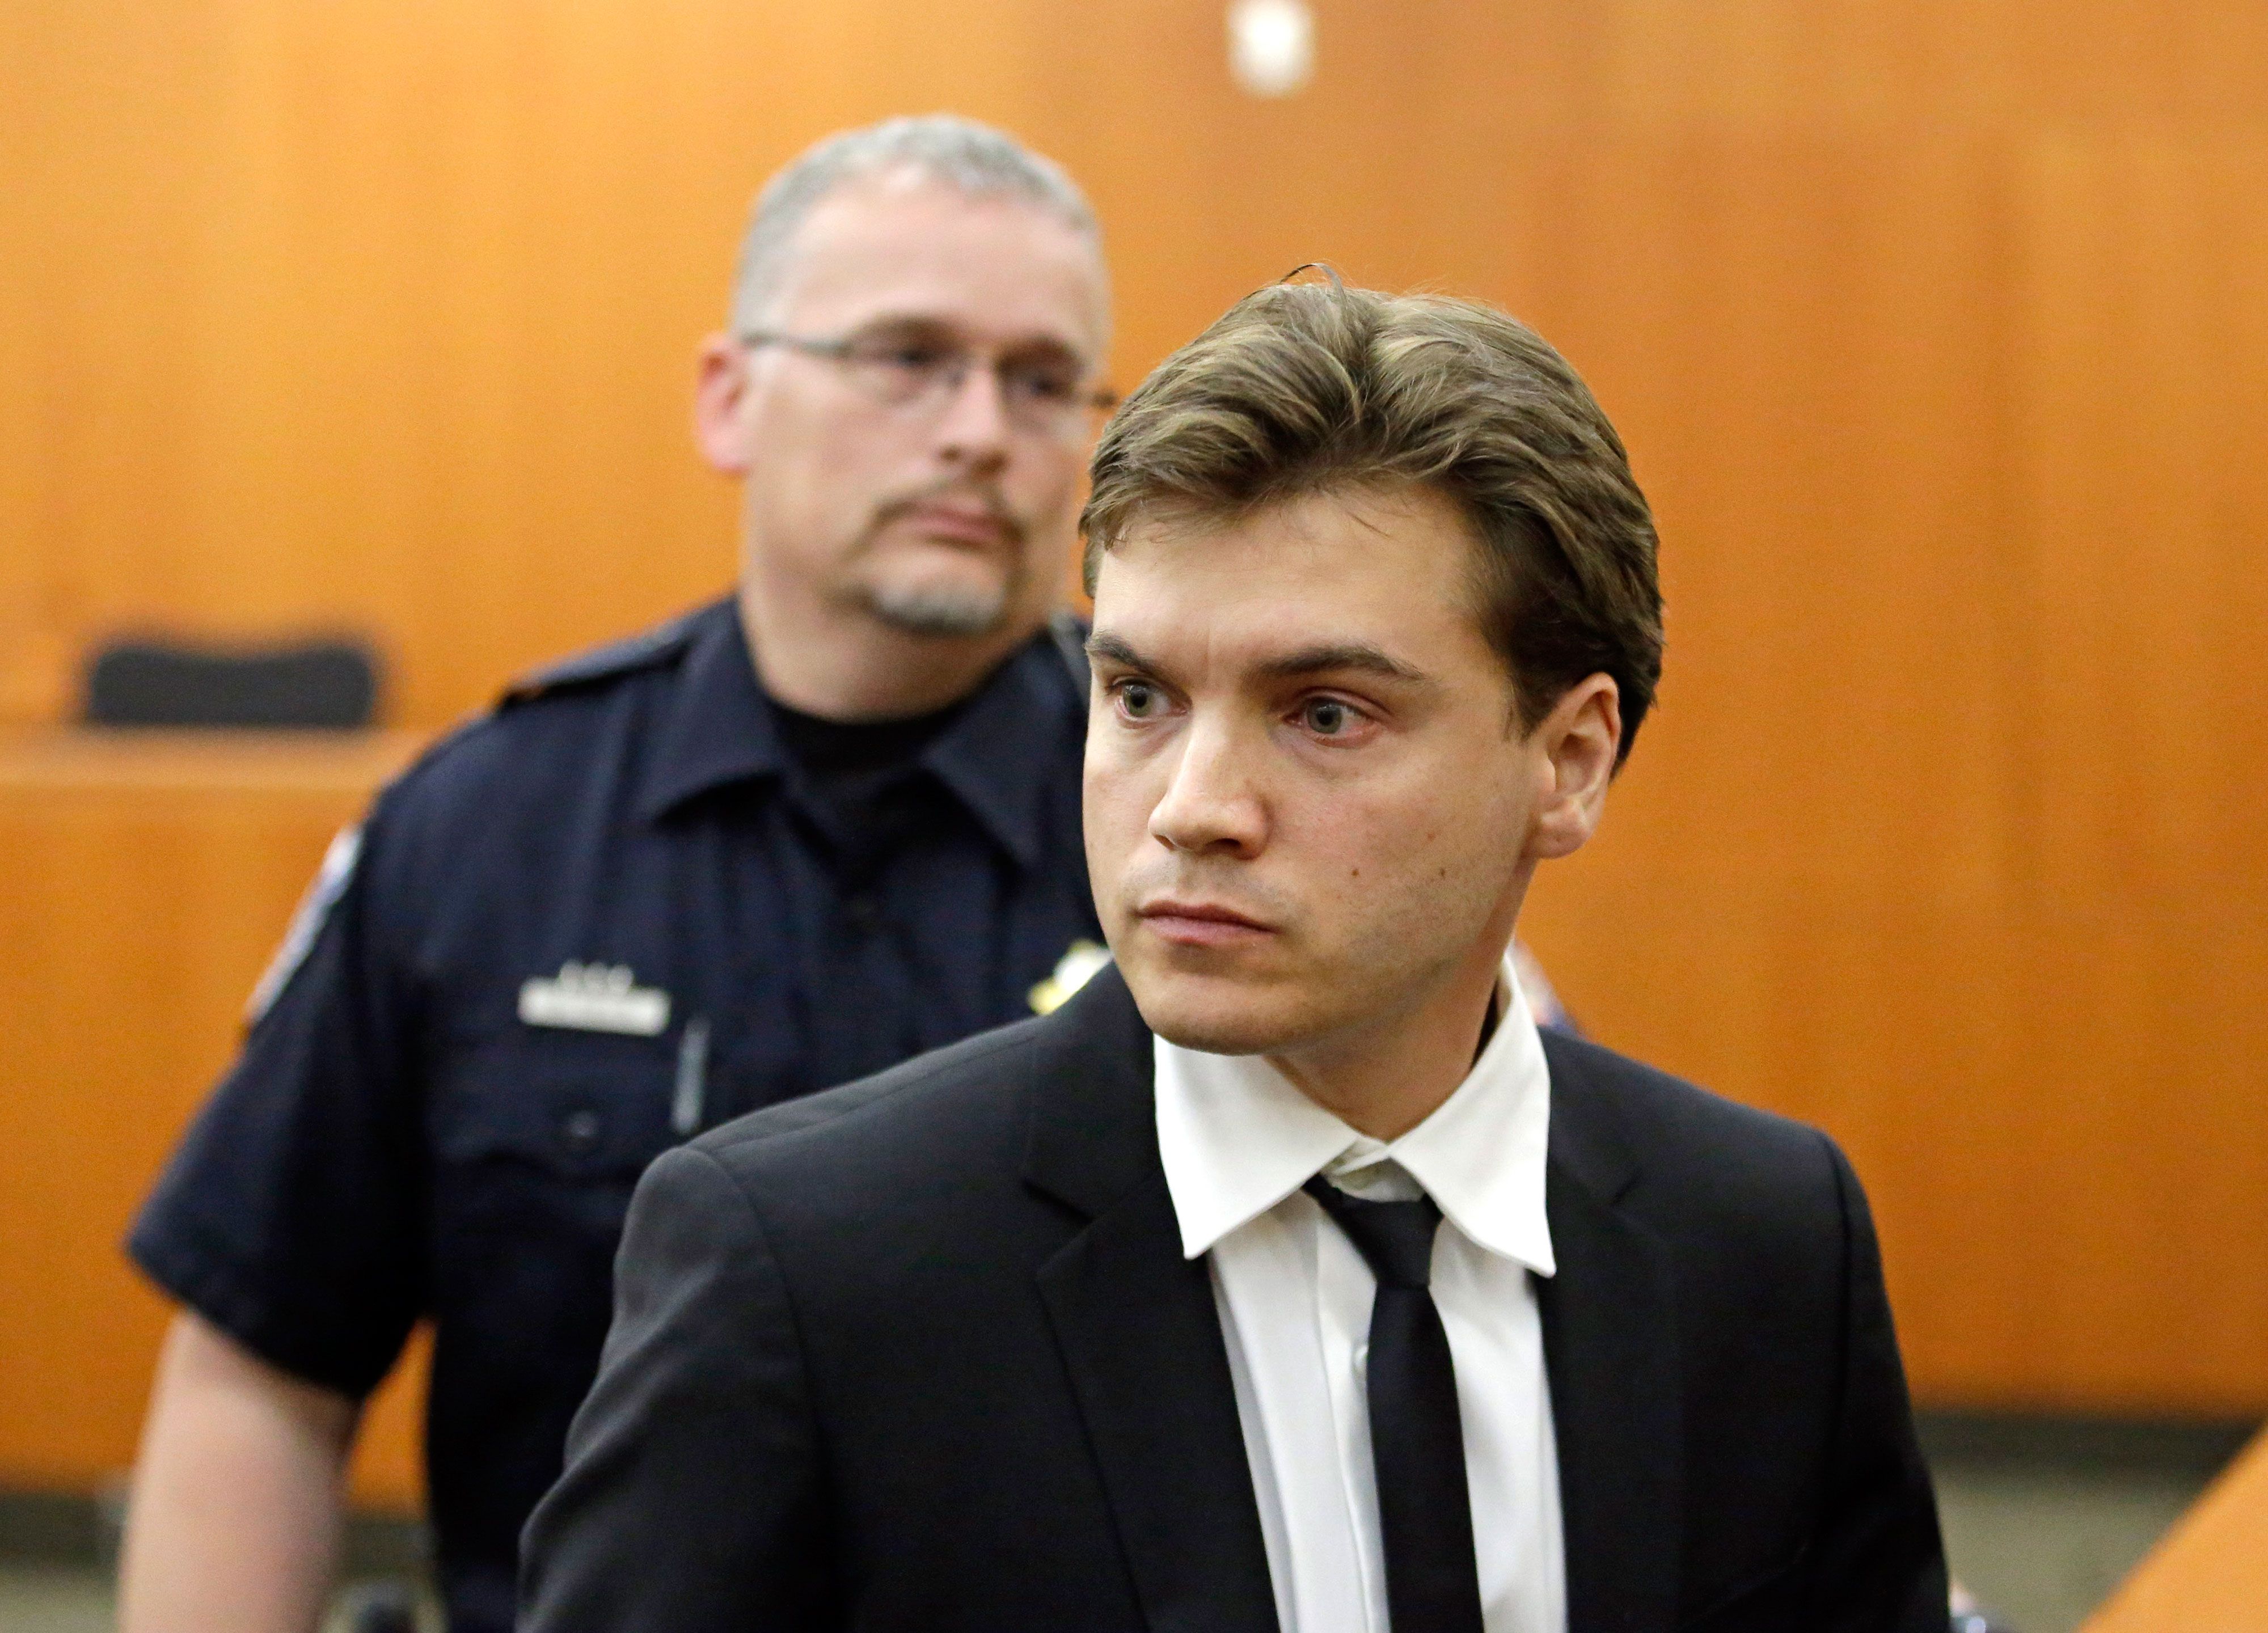 Emile Hirsch gets just 15 days in jail for choking a woman